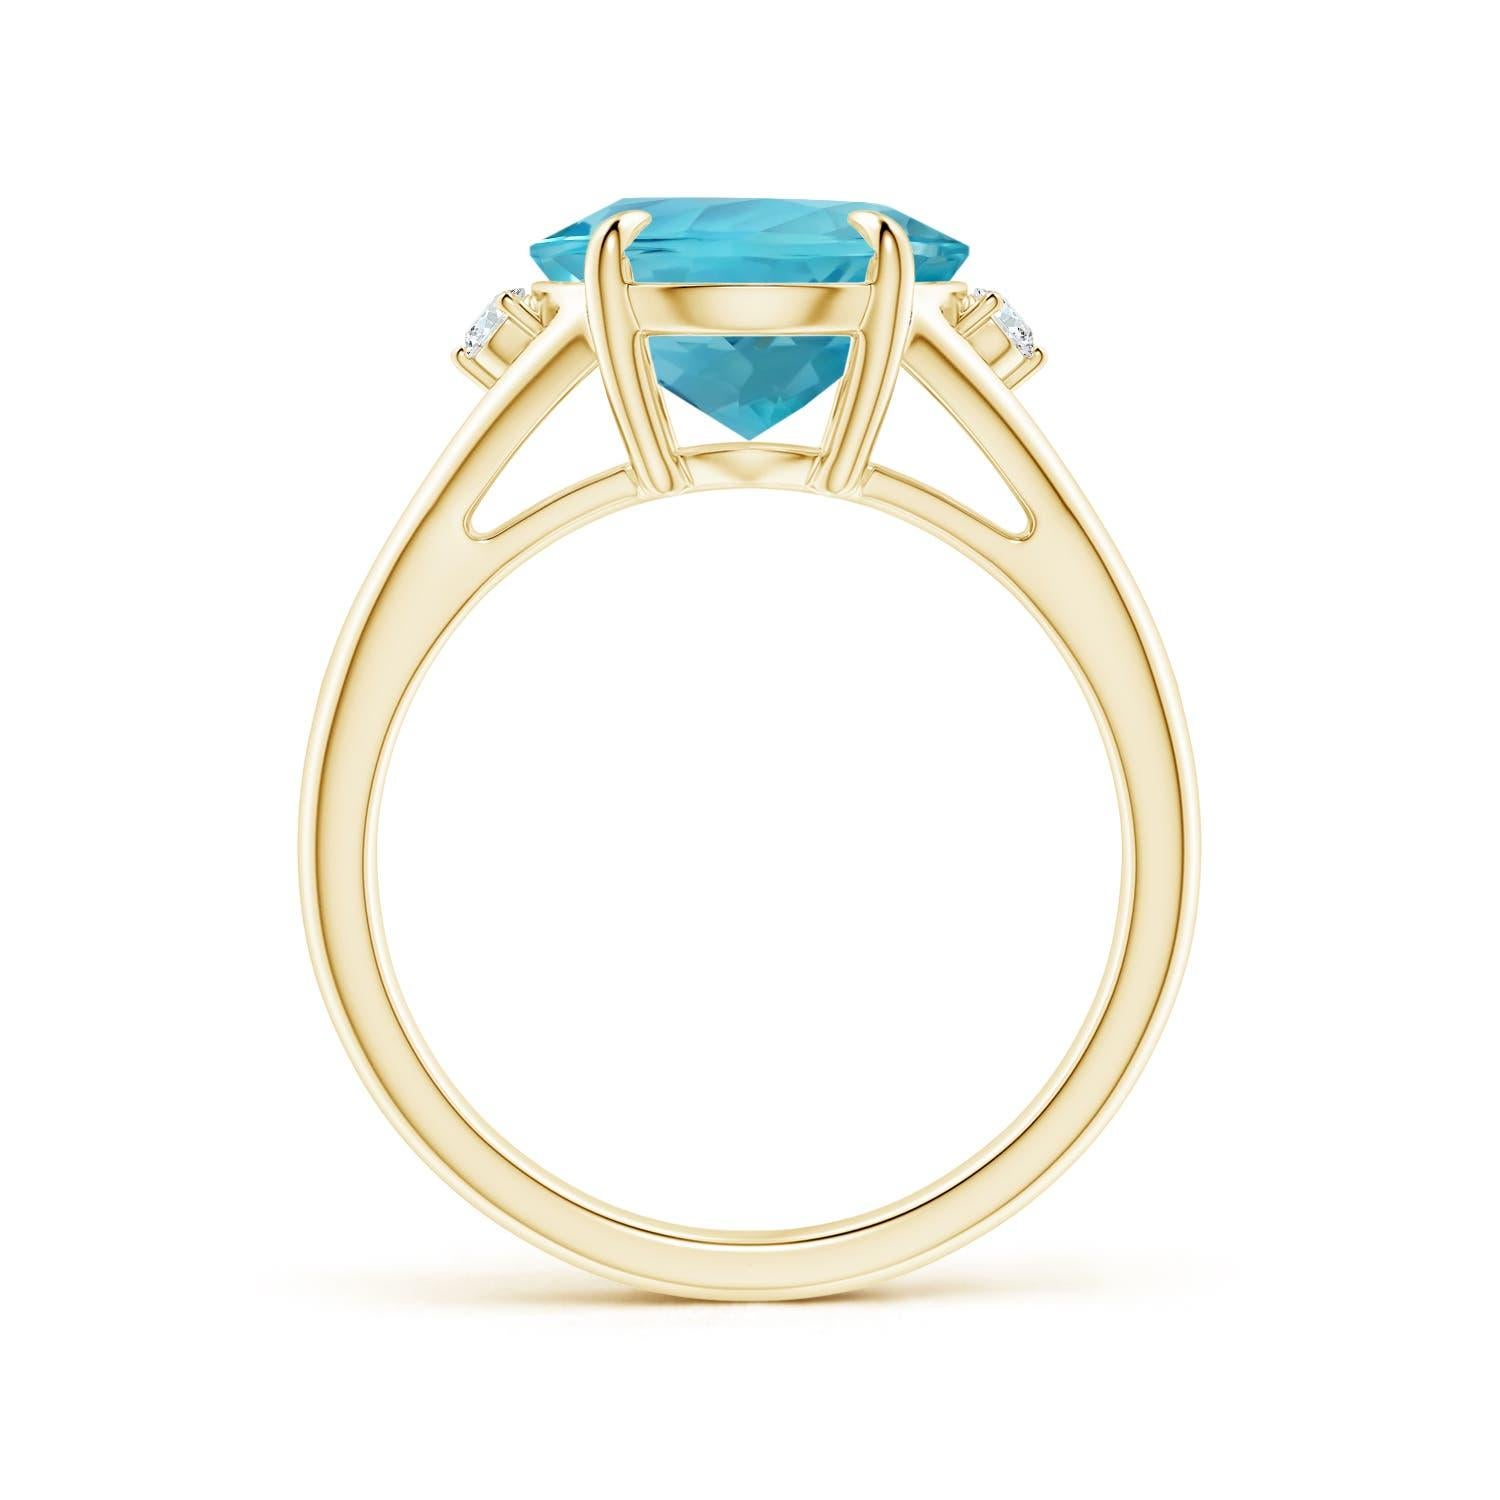 For Sale:  Angara Gia Certified Natural Aquamarine Ring in Yellow Gold with Diamond Accents 2